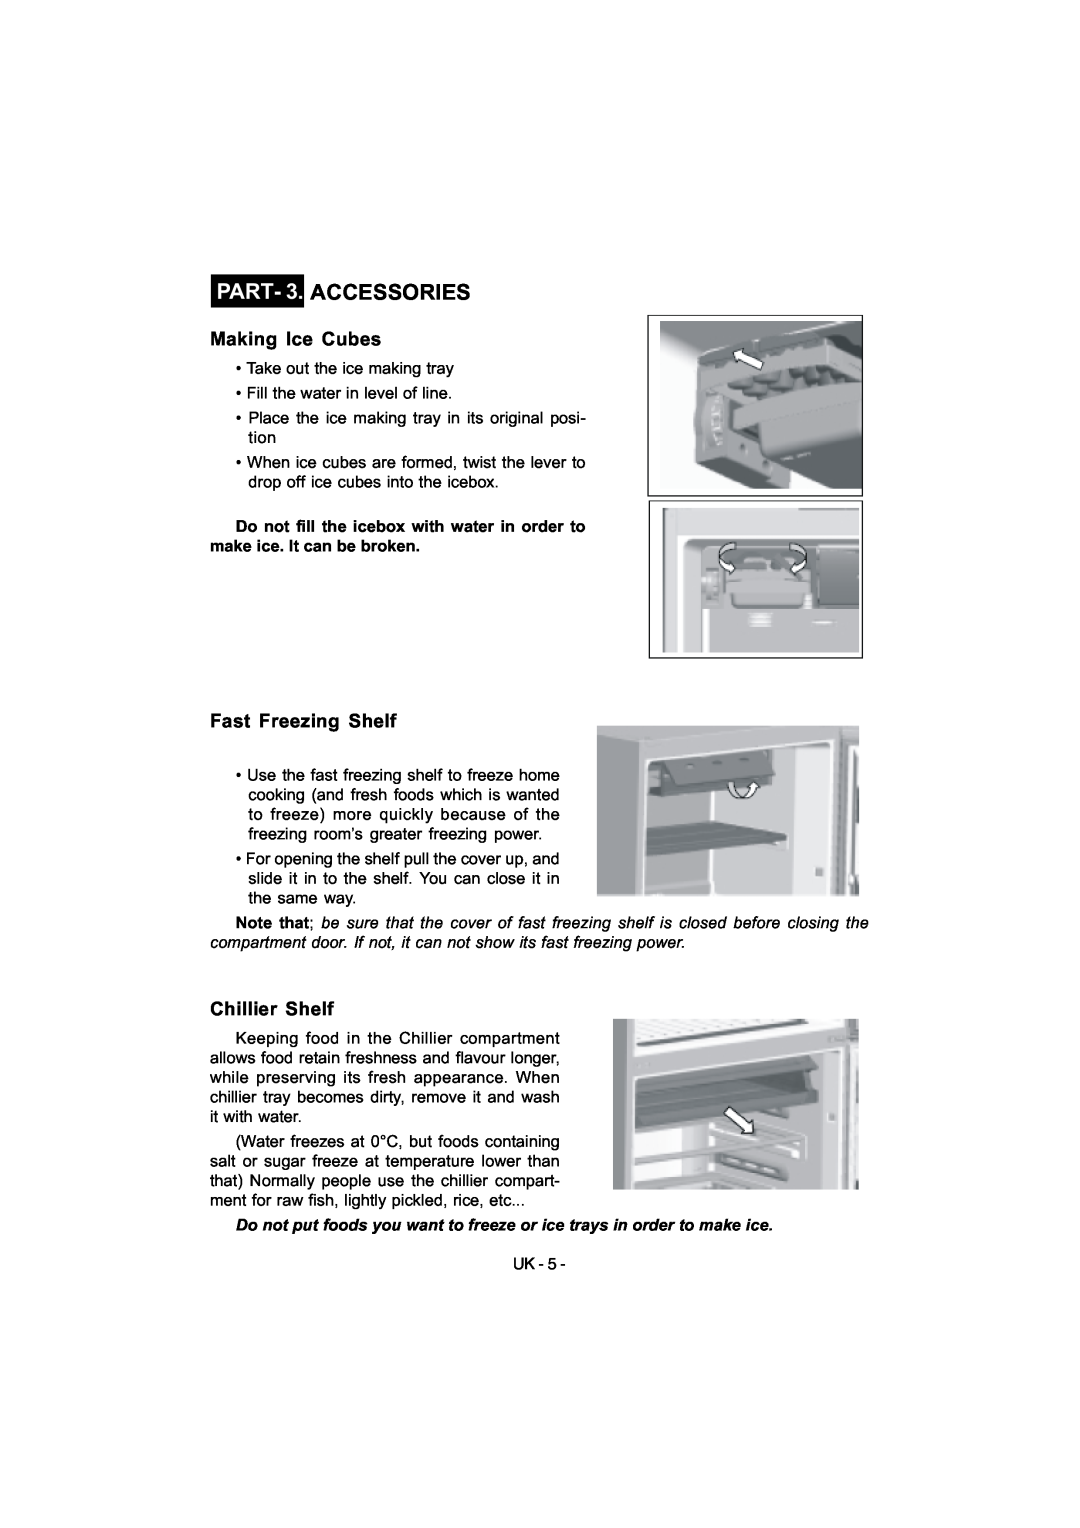 Smeg FD54APXNF manual PART- 3. ACCESSORIES, Making Ice Cubes, Fast Freezing Shelf, Chillier Shelf 